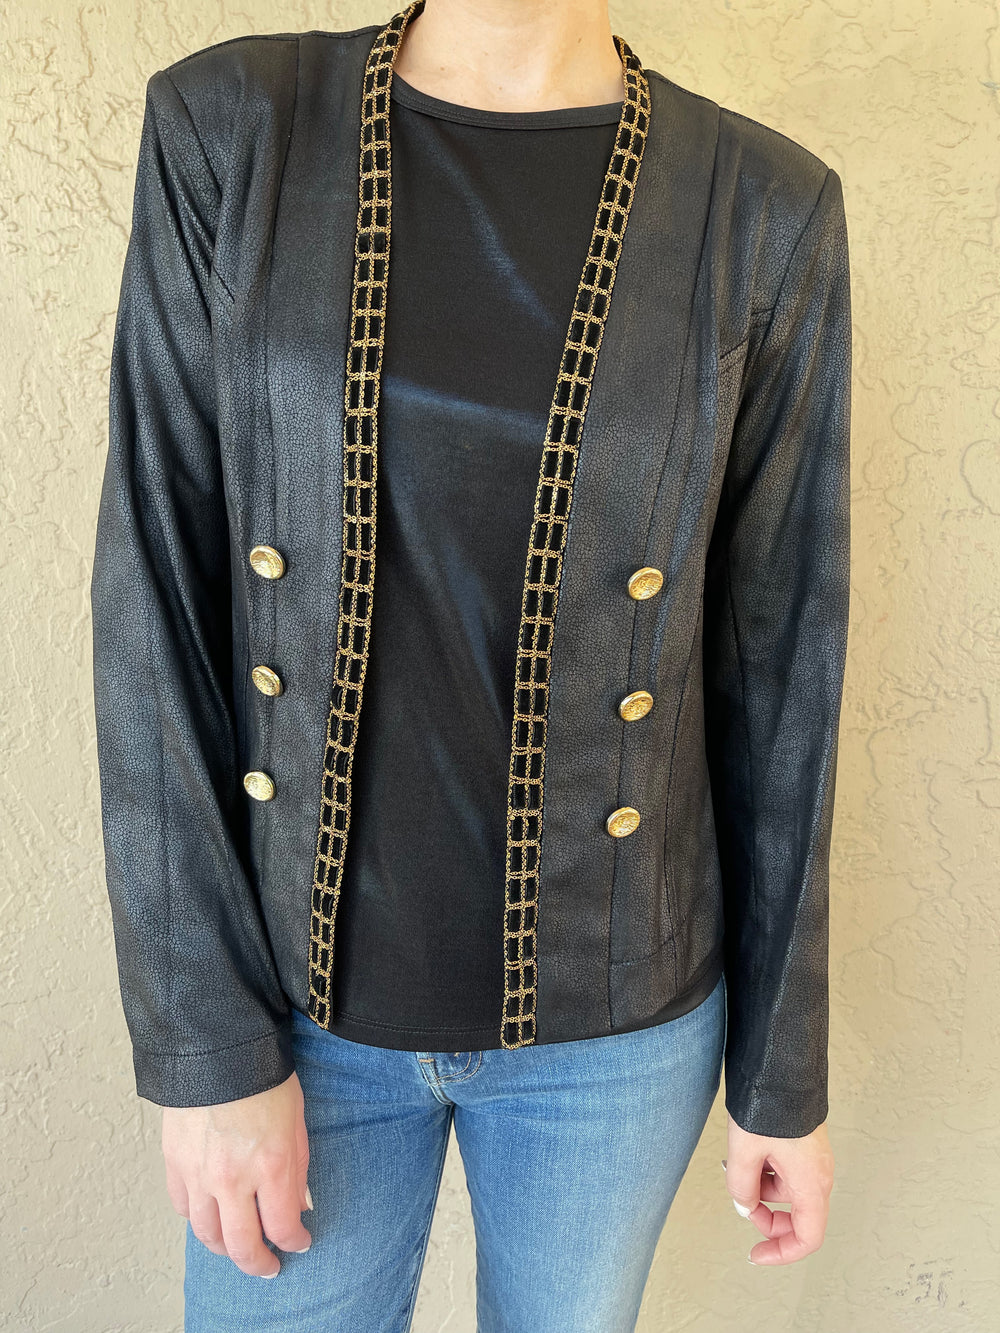 Jacket with Gold Zipper Detailing